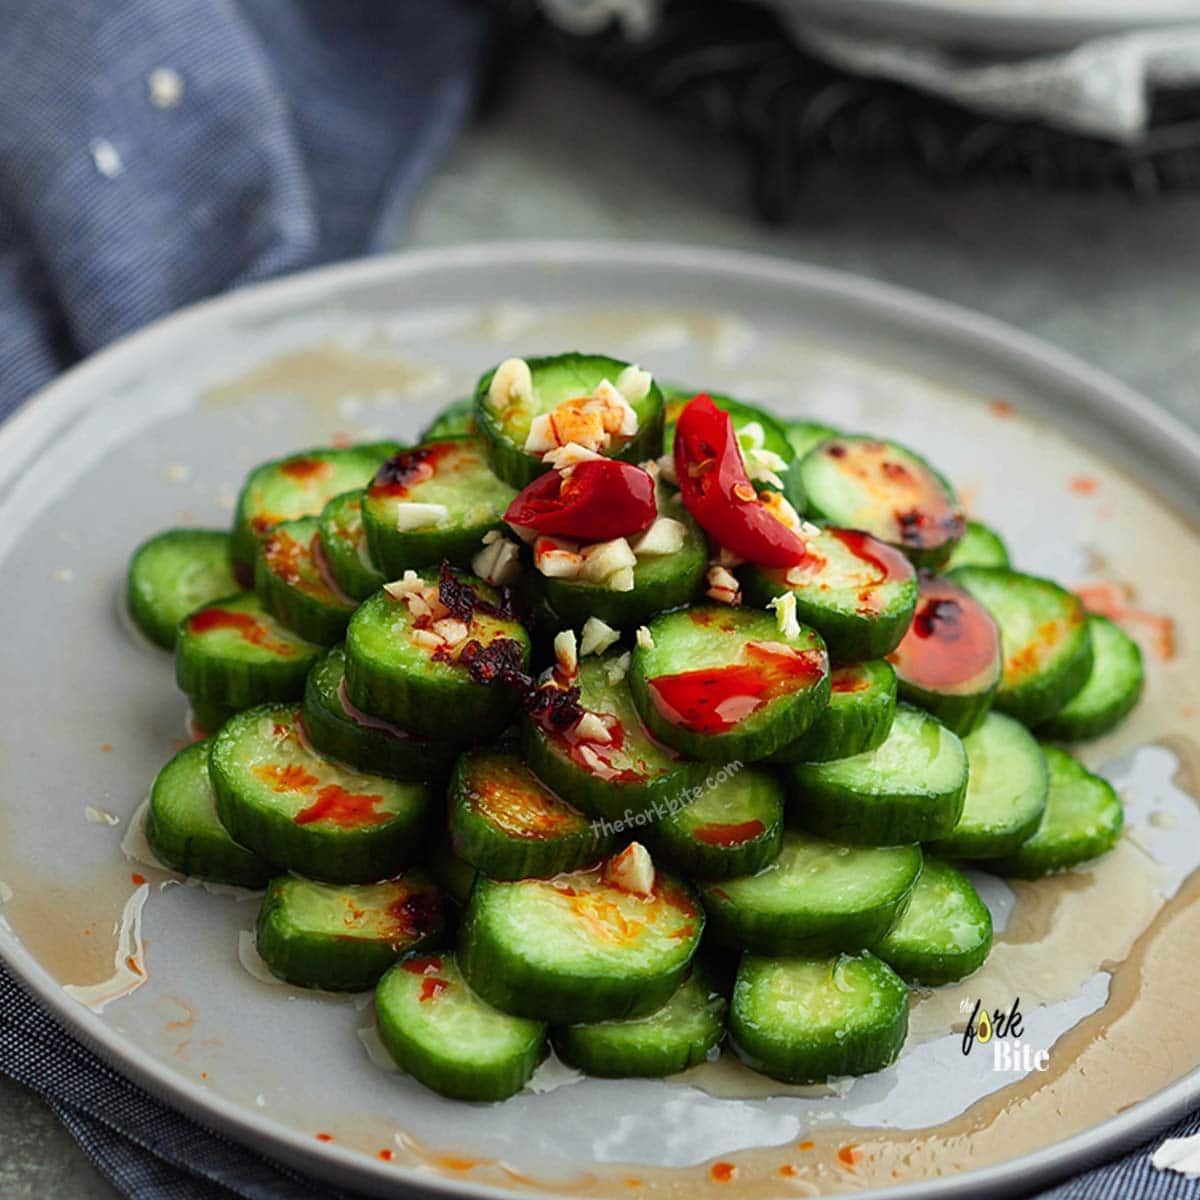 Din Tai Fung Cucumber salad is made with lightly brined Persian cucumbers and dressed in a simple garlicky Asian vinaigrette, made with rice vinegar, soy sauce, garlic, and chili flakes.